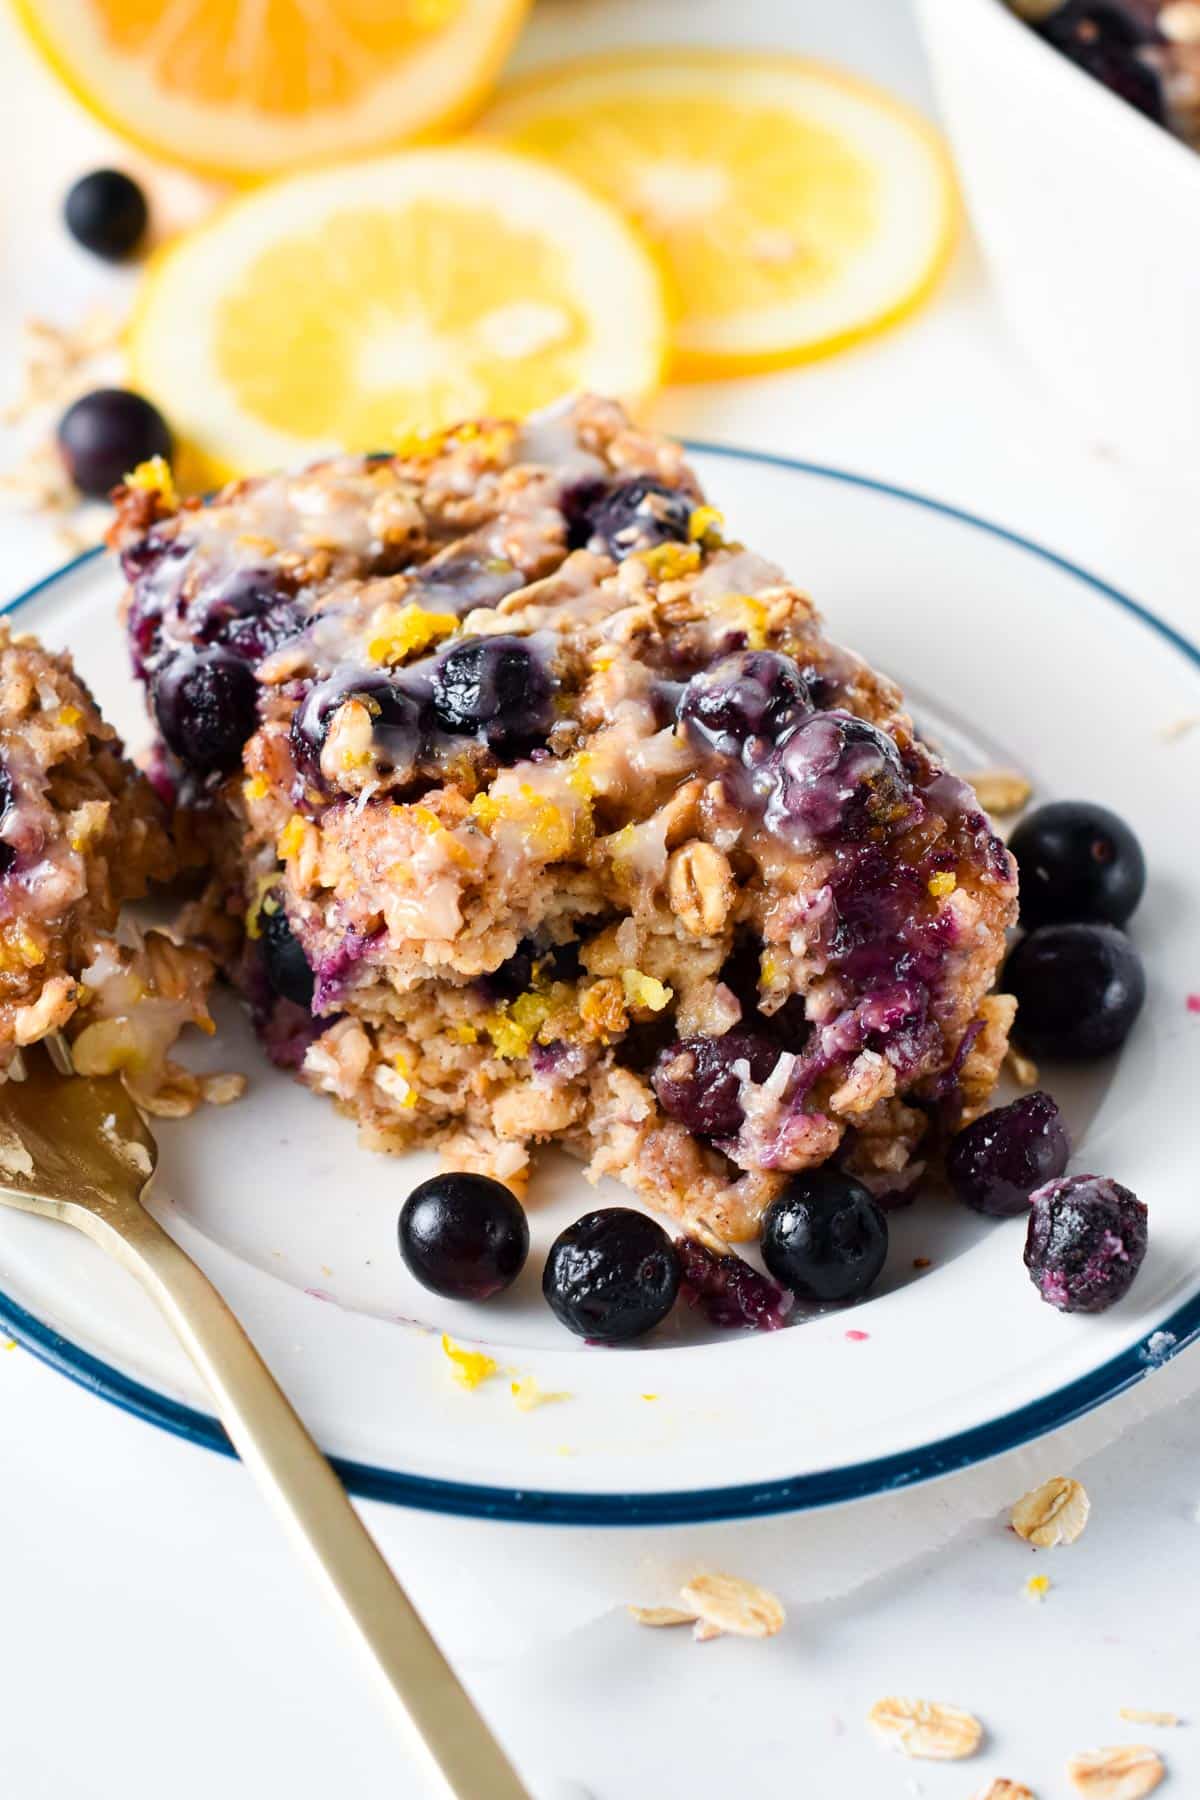 Blueberry Lemon Baked Oatmeal slice on a white plate with blue edges.